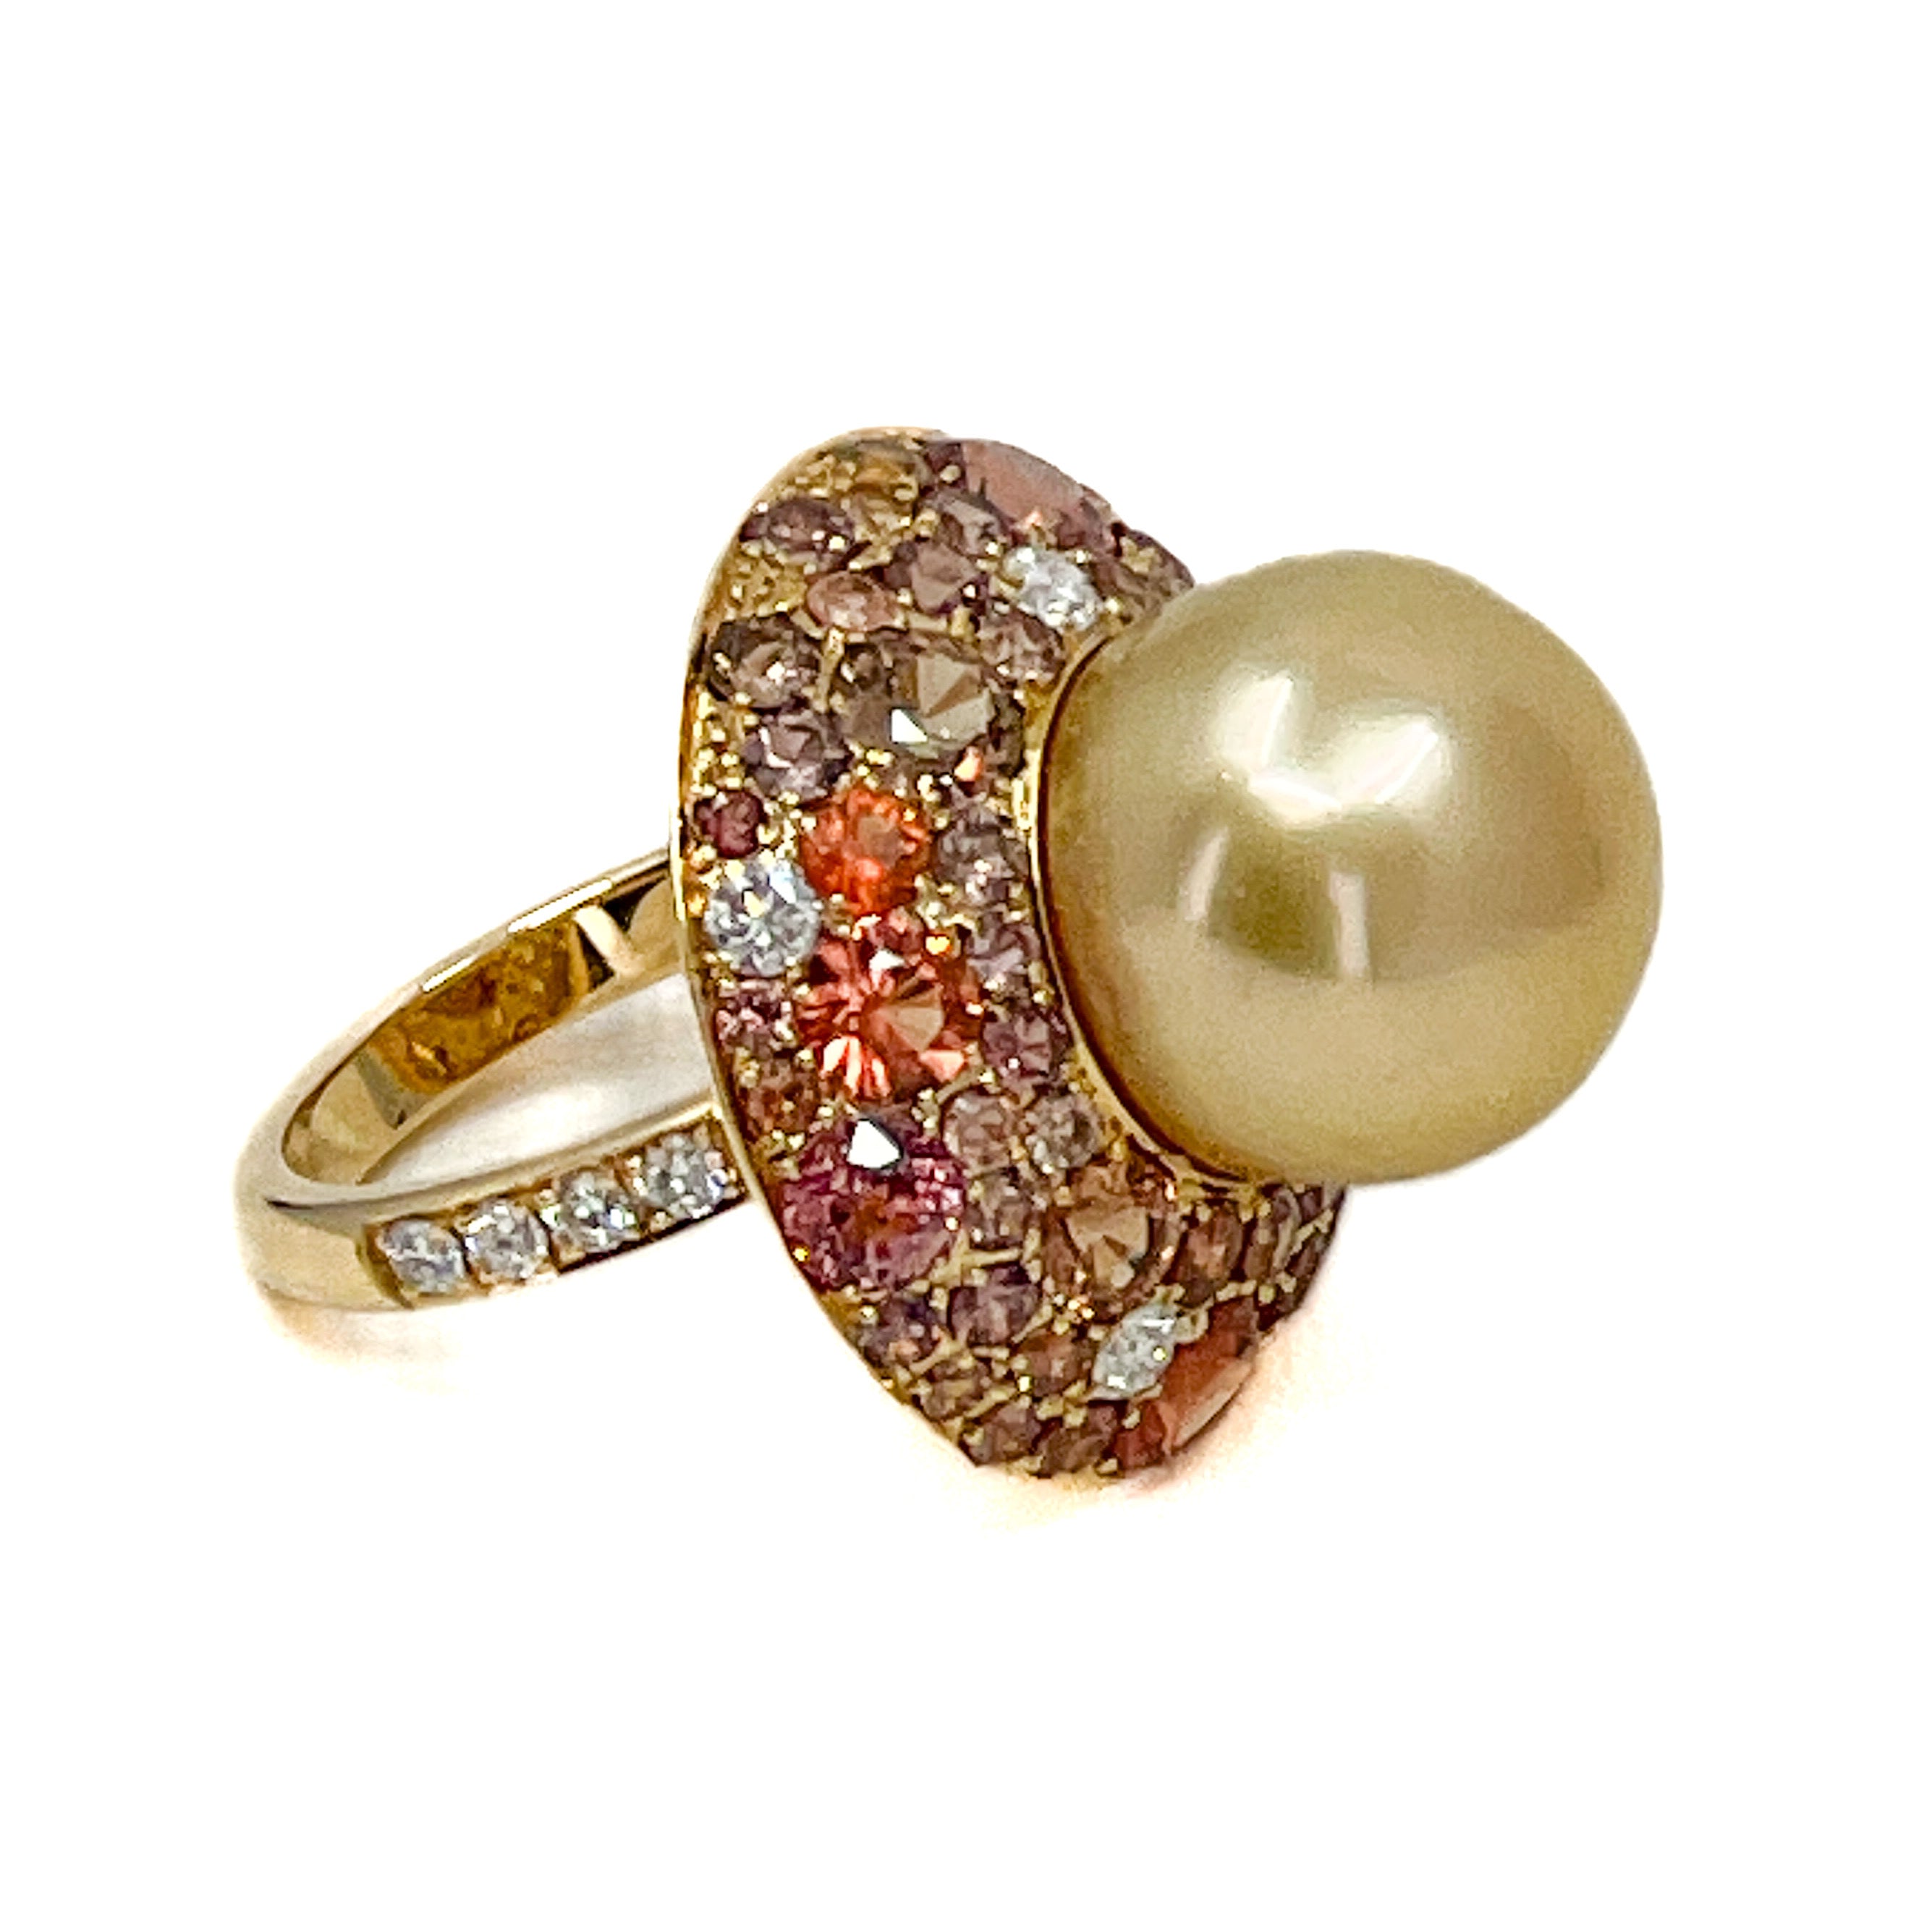 Golden South Sea Pearl Ring with Confetti Surround